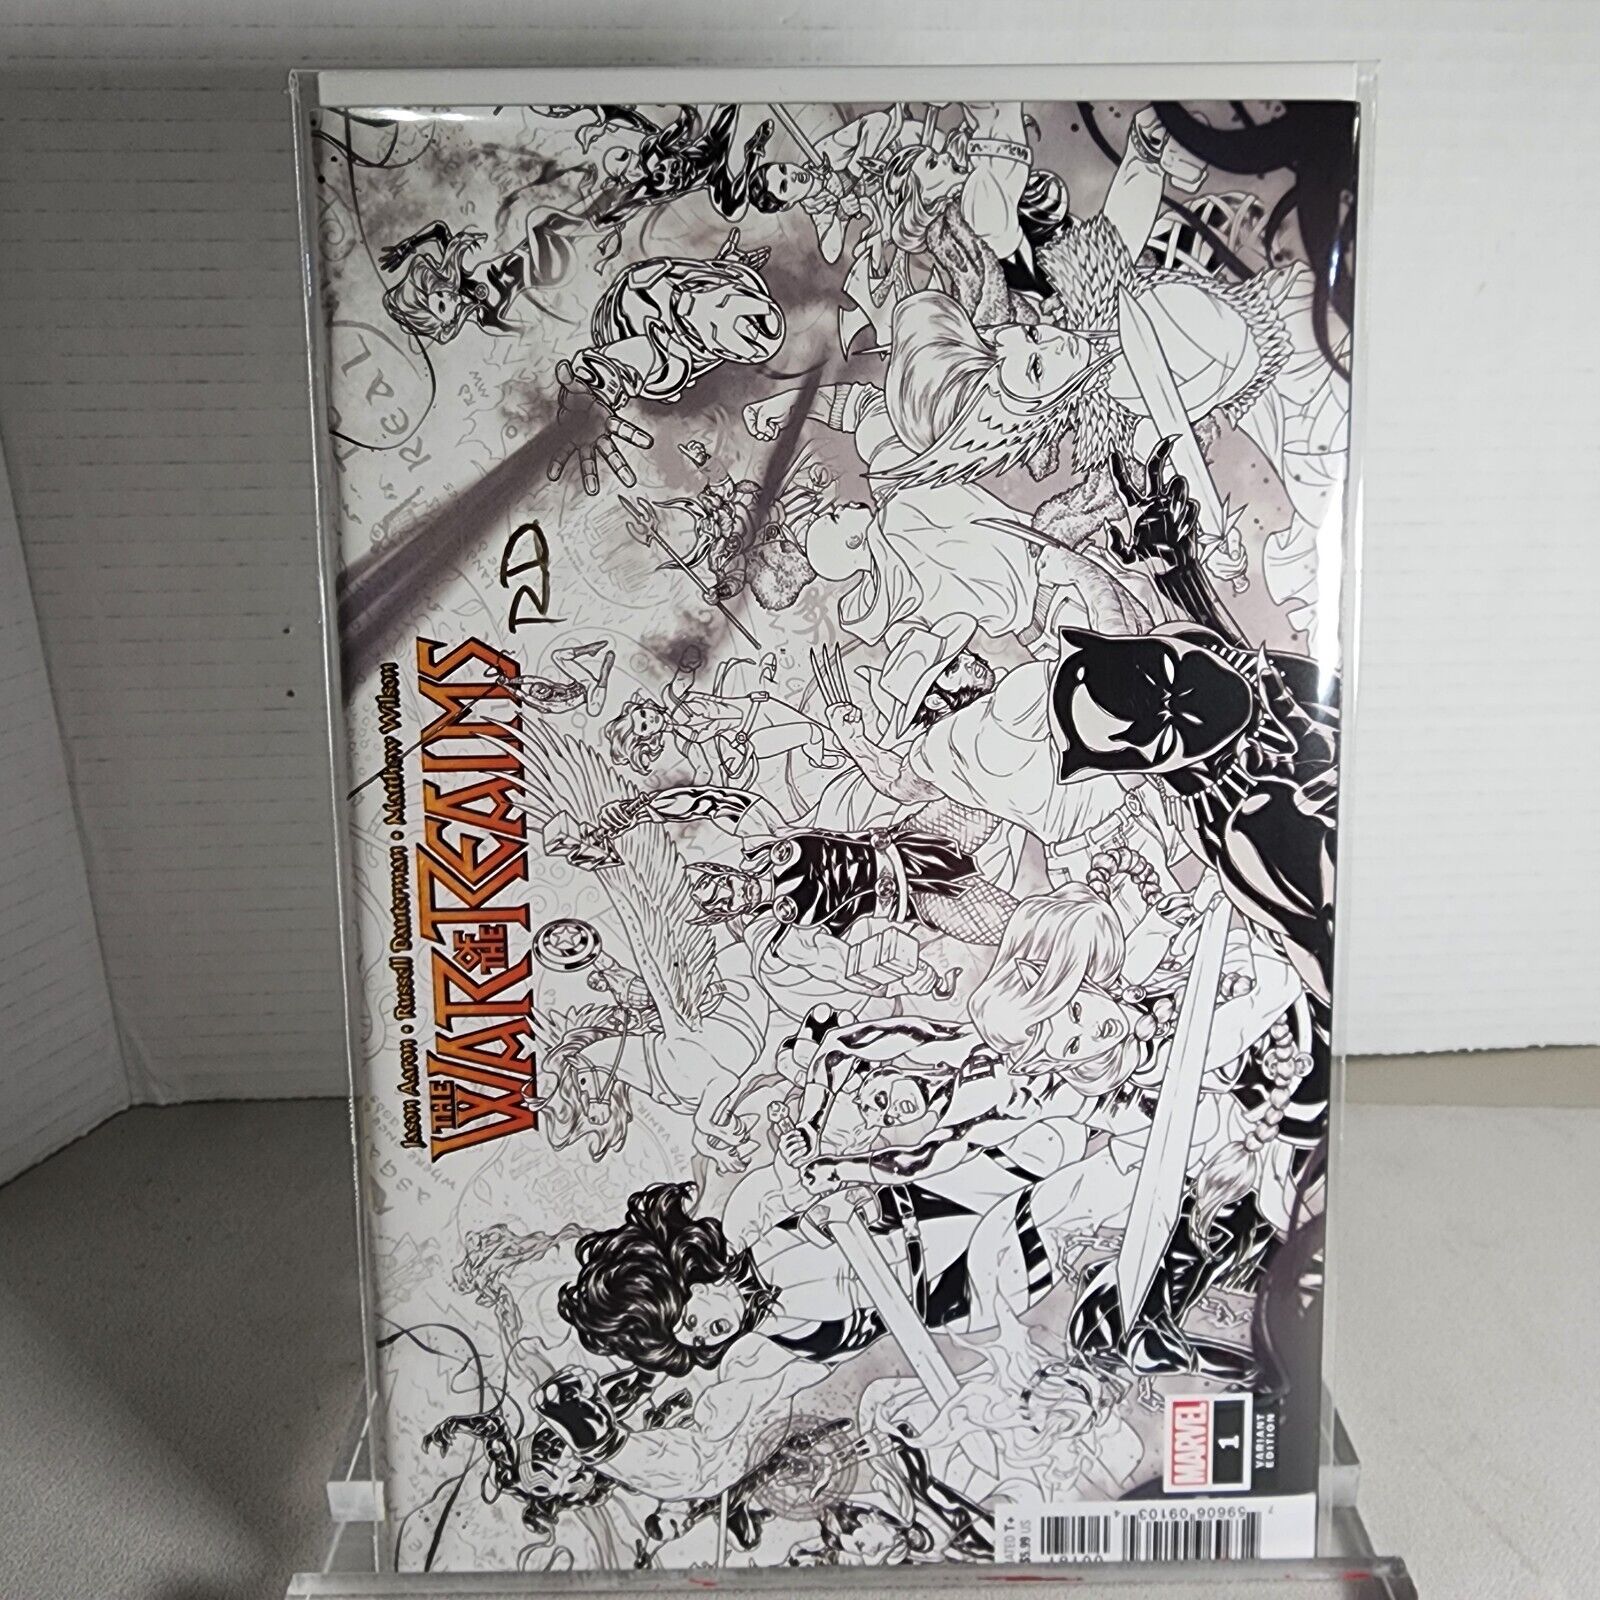 Marvel Comics WAR OF THE REALMS #1 1:10 DAUTERMAN SKETCH VARIANT COVER Signed